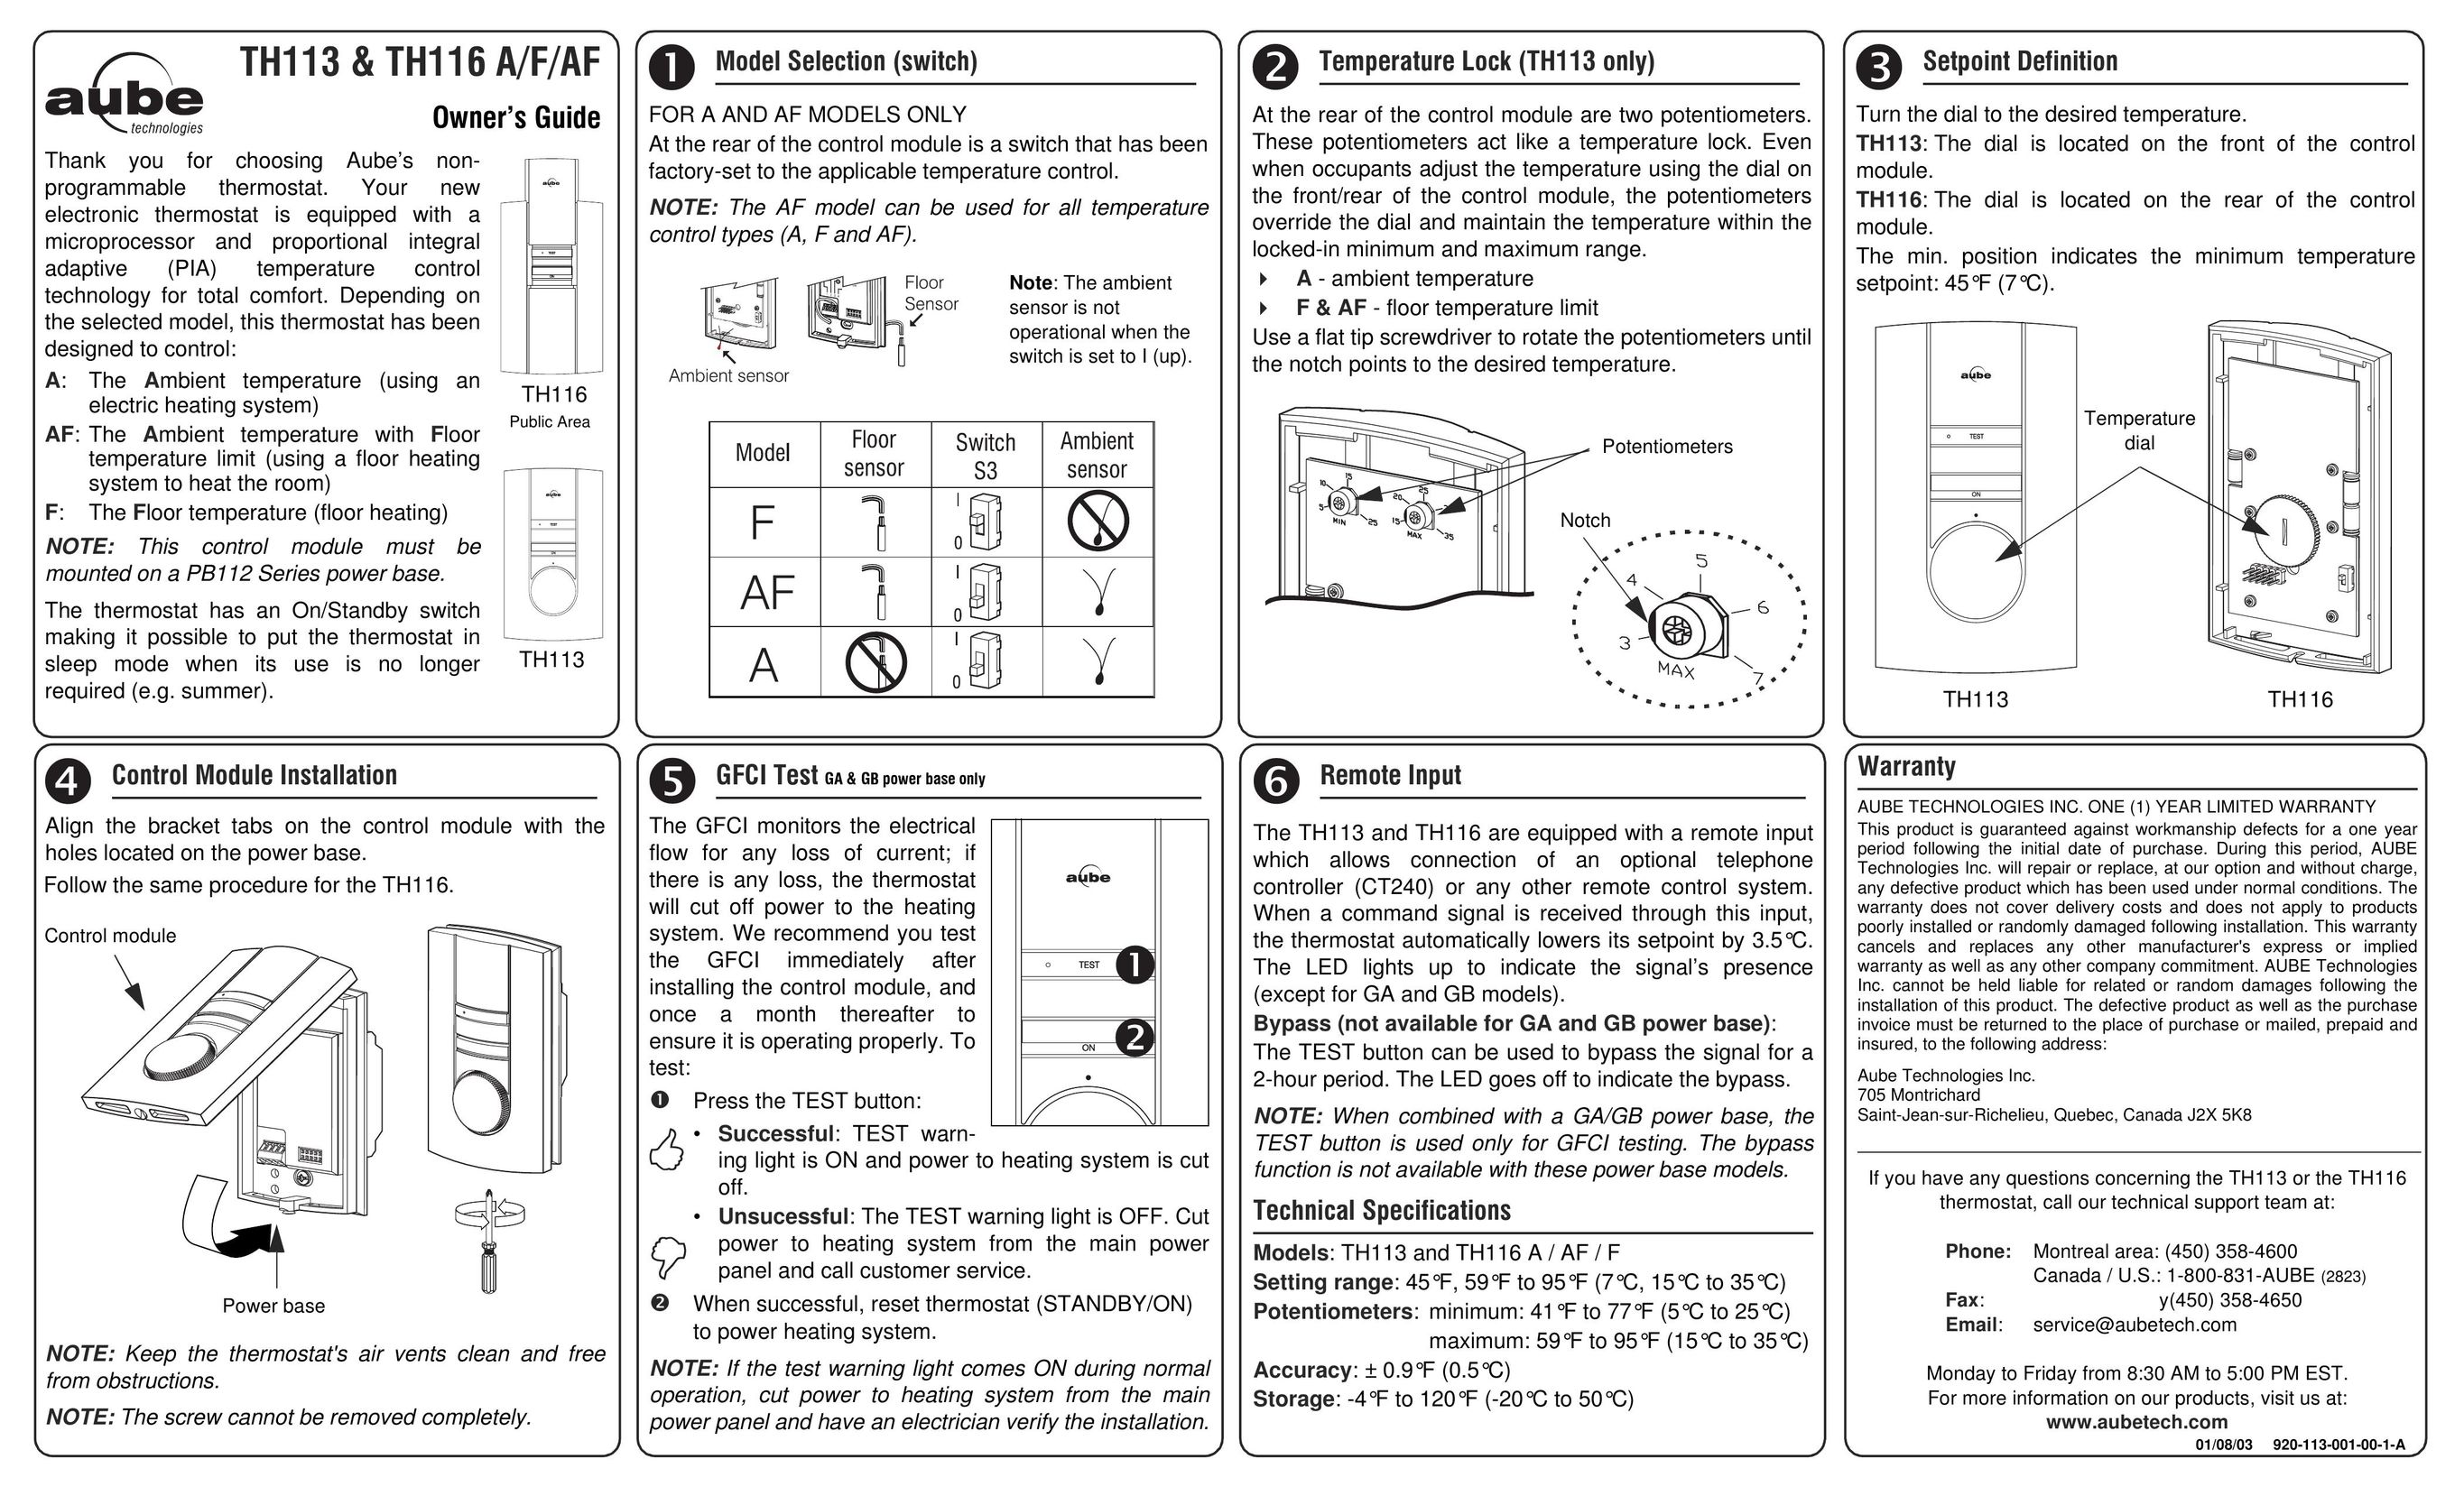 Aube Technologies TH116 A/F/AF Thermostat User Manual